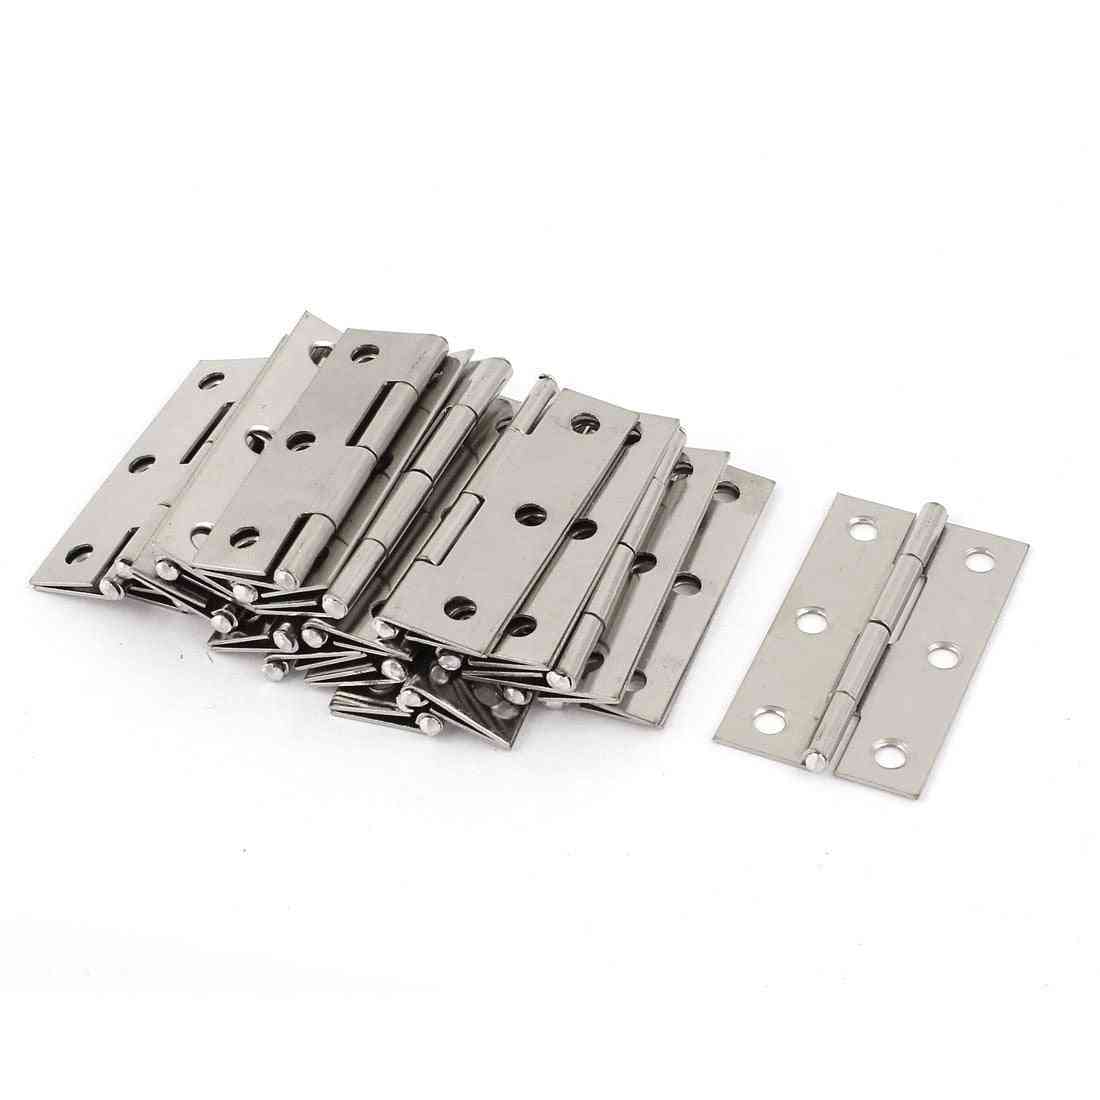 Stainless Steel 6 Mounting Holes Butt Hinges